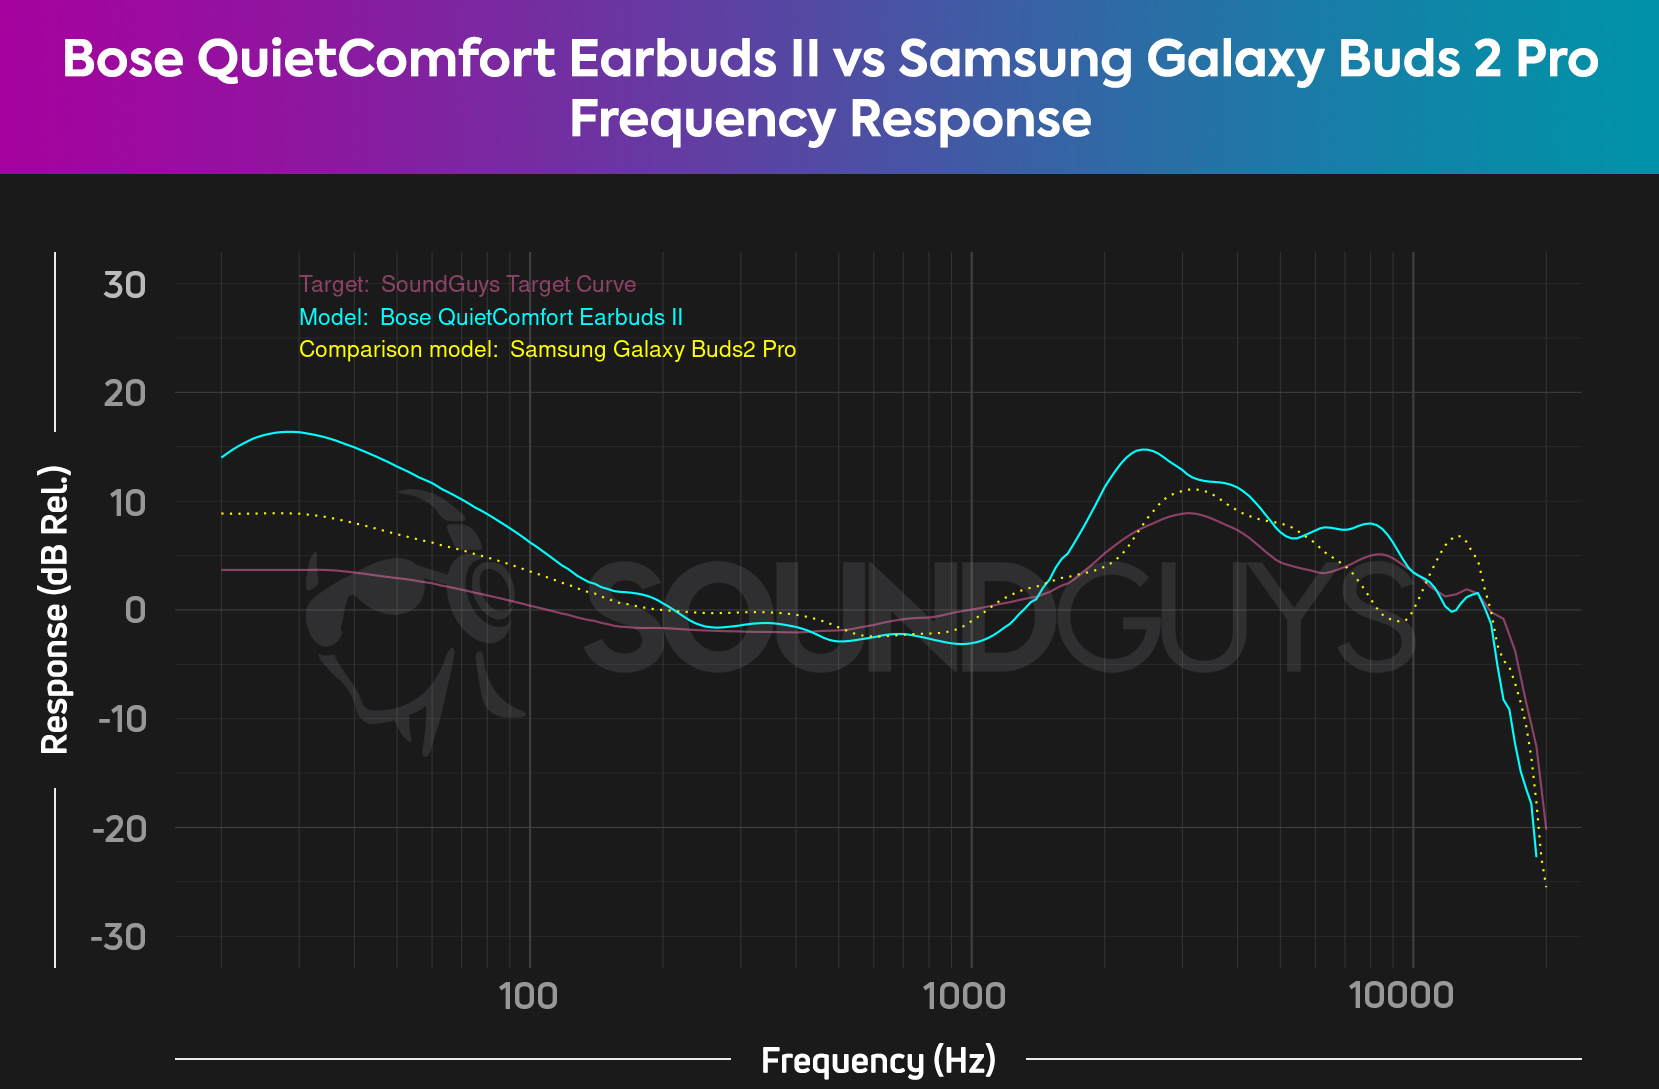 The Bose QuietComfort Earbuds II frequency response compared to the Samsung Galaxy Buds 2 Pro and the SoundGuys target curve.